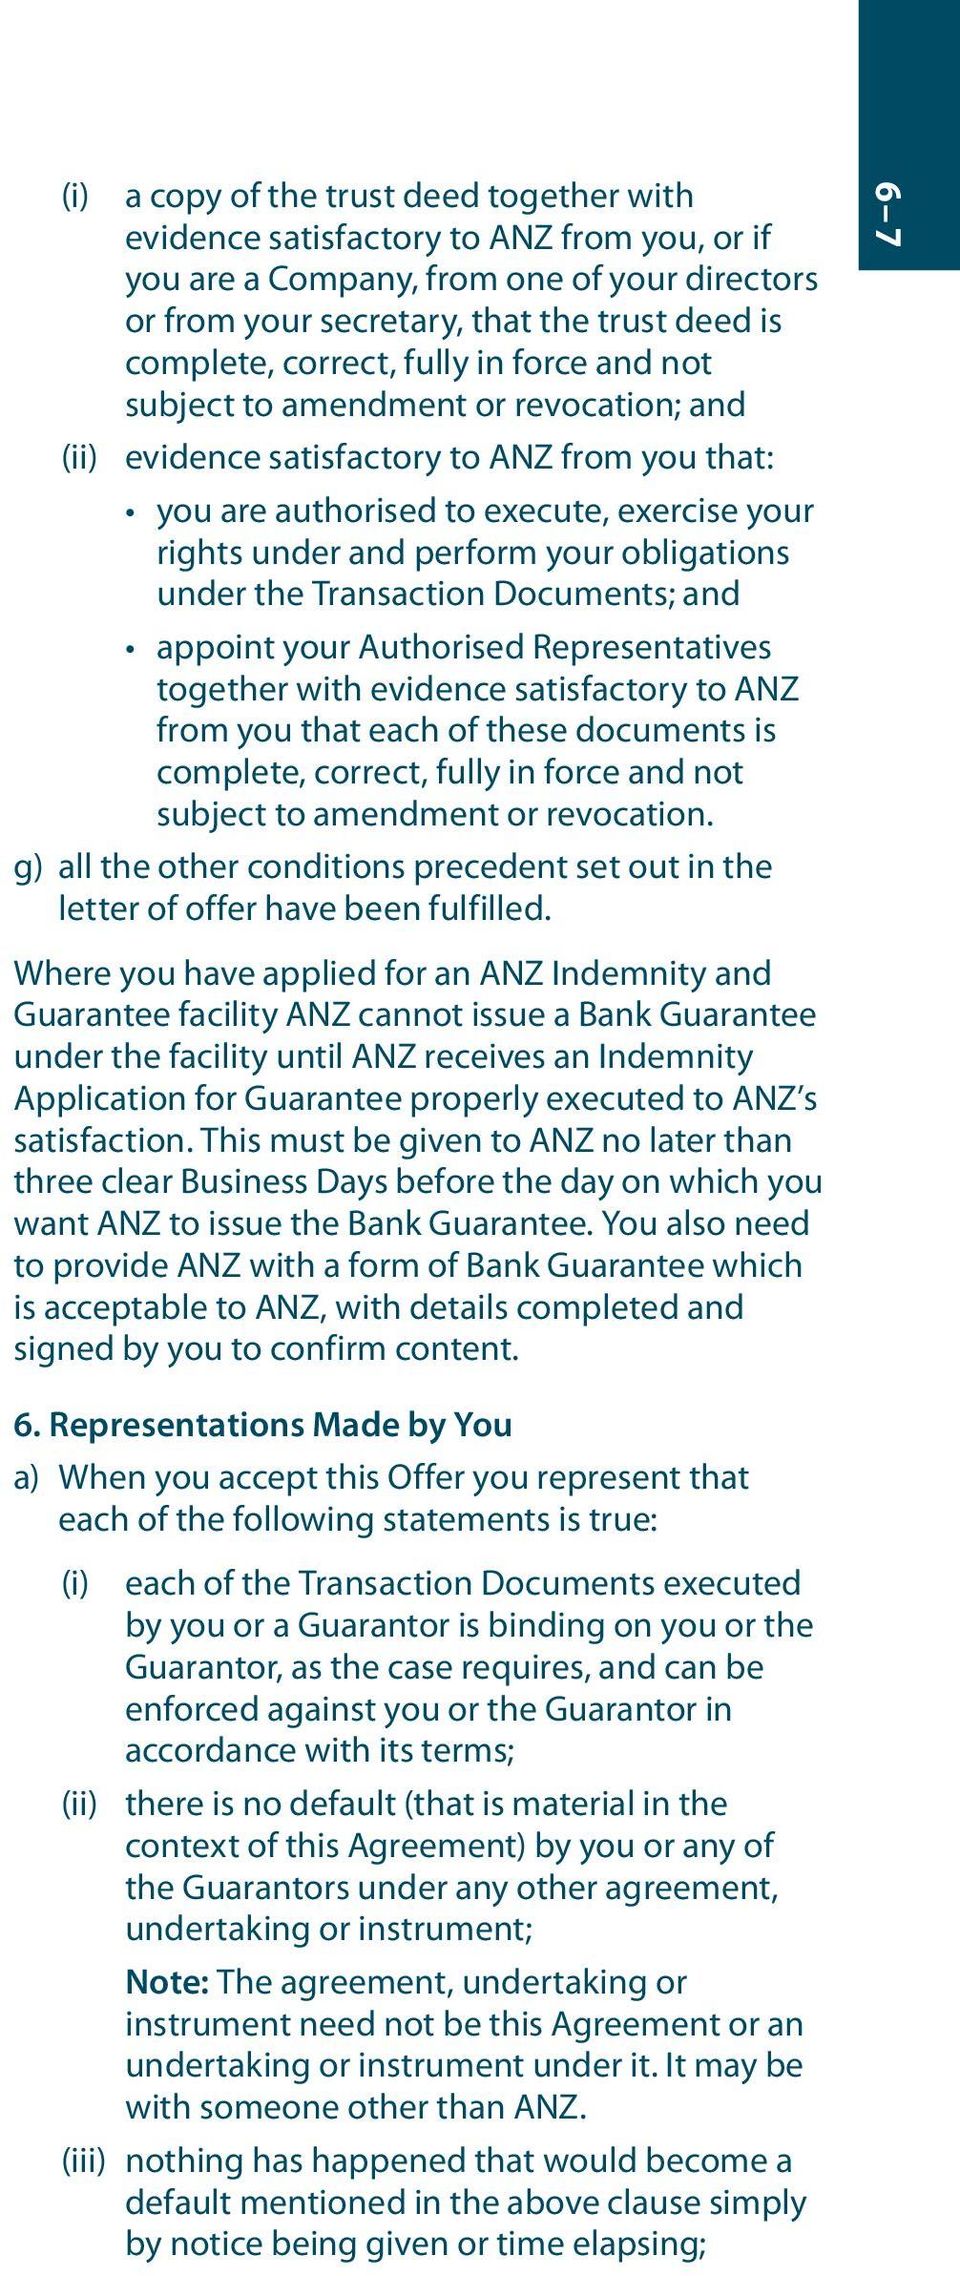 under the Transaction Documents; and appoint your Authorised Representatives together with evidence satisfactory to ANZ from you that each of these documents is complete, correct, fully in force and